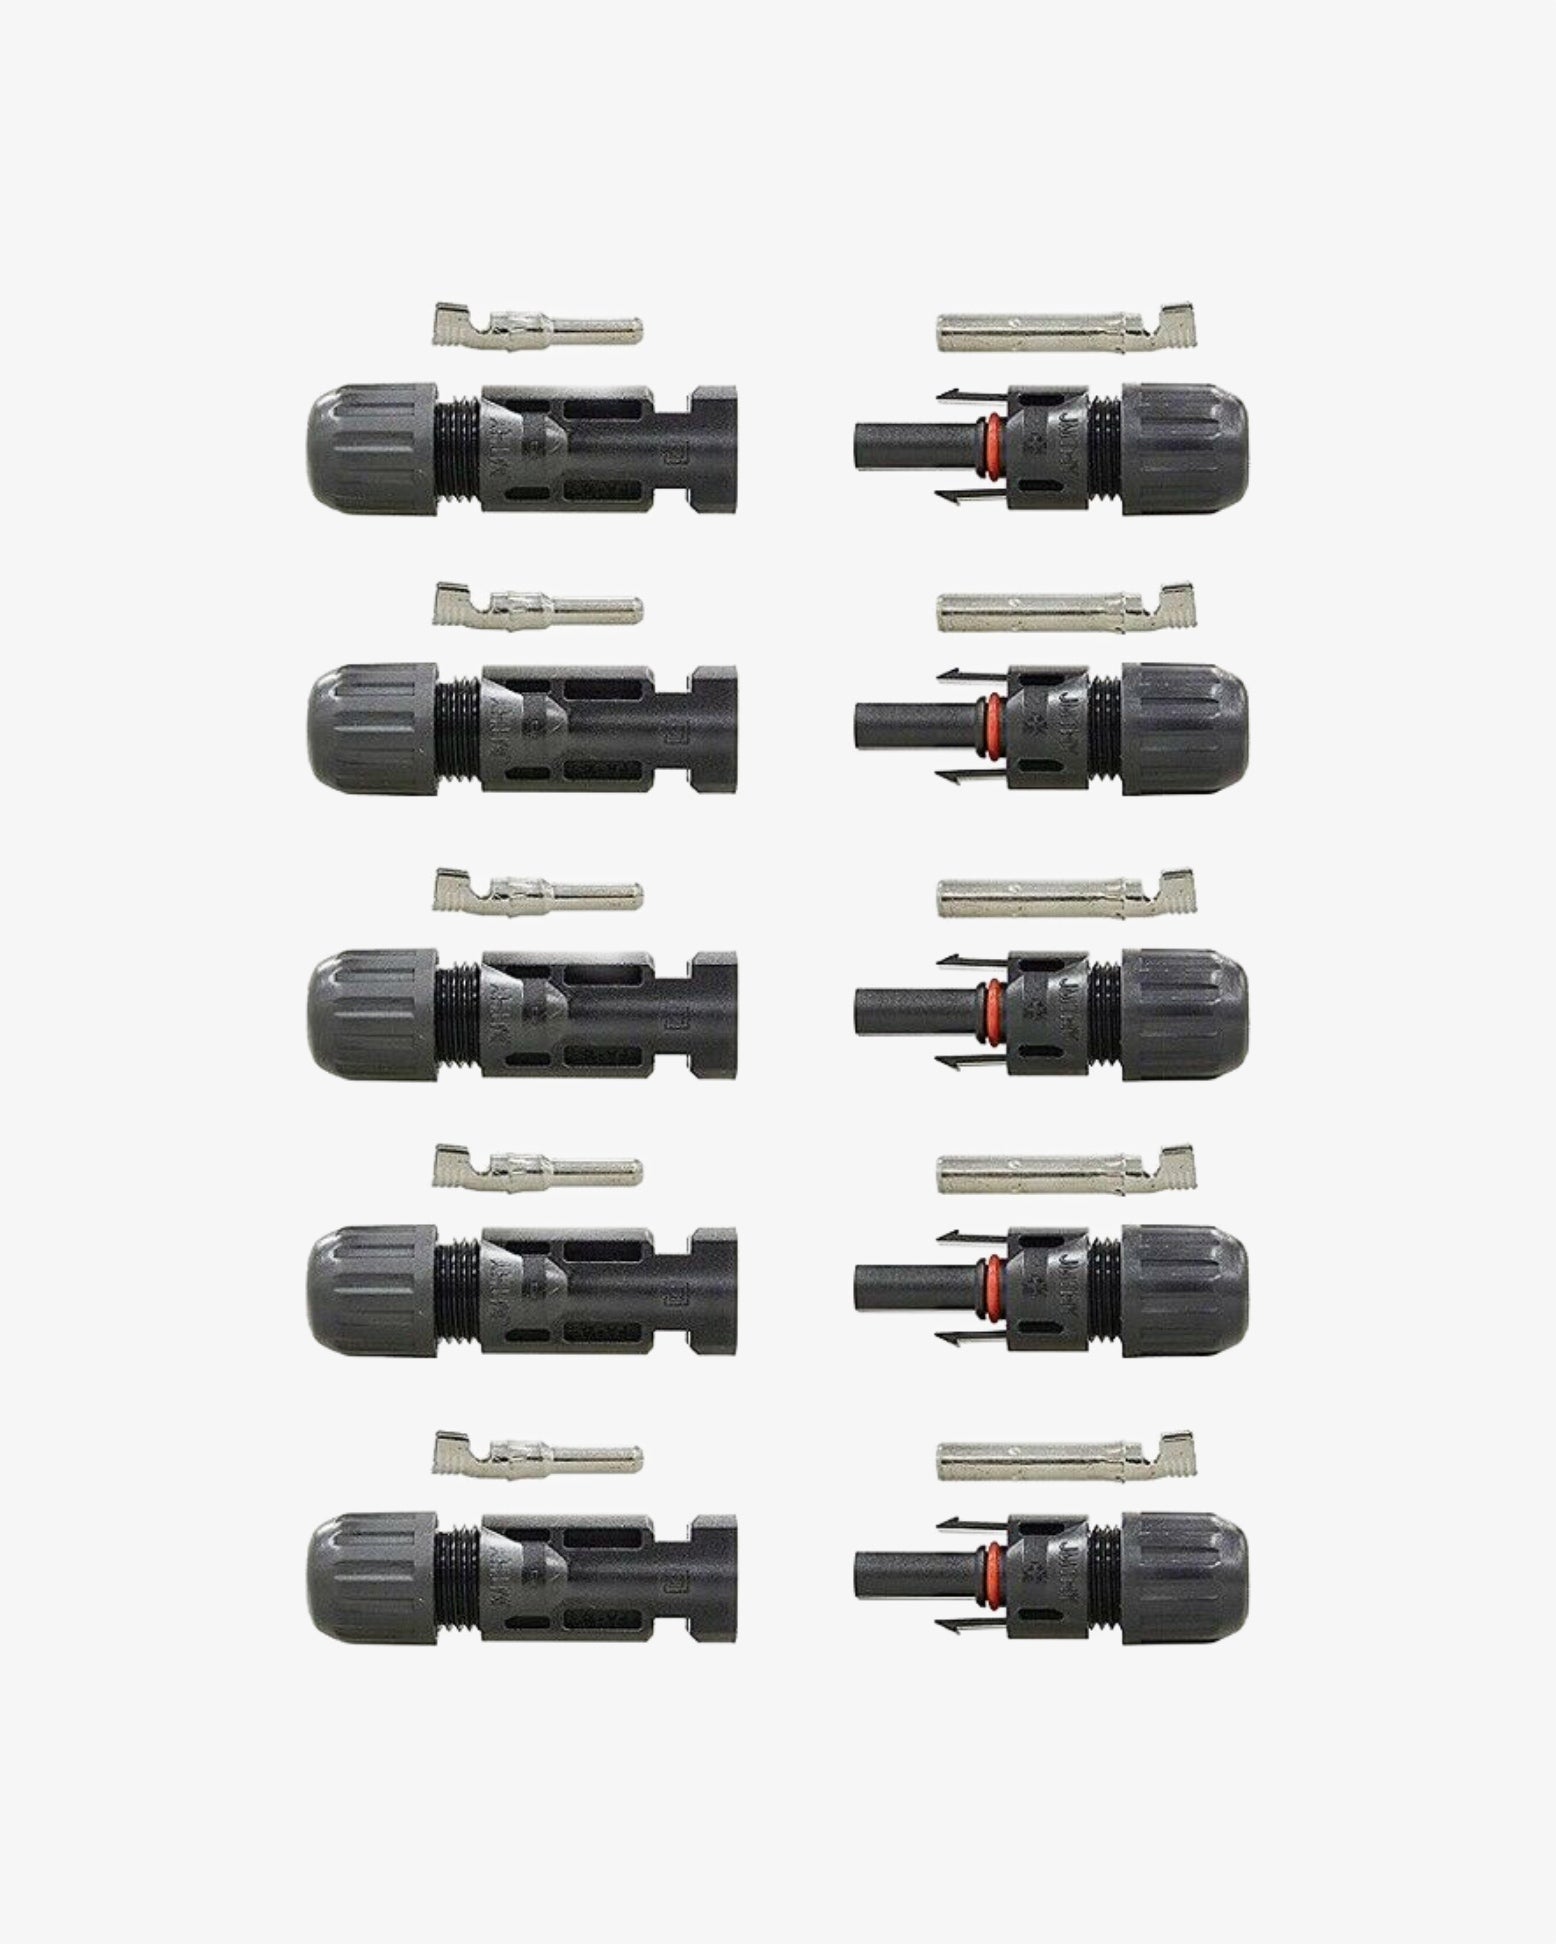 Professional Parallel Connector Universal MMF/FFM Solar Branch Adapter  Solars Simple Operation Panel Cables Distributor Cable Plug In-line Socket